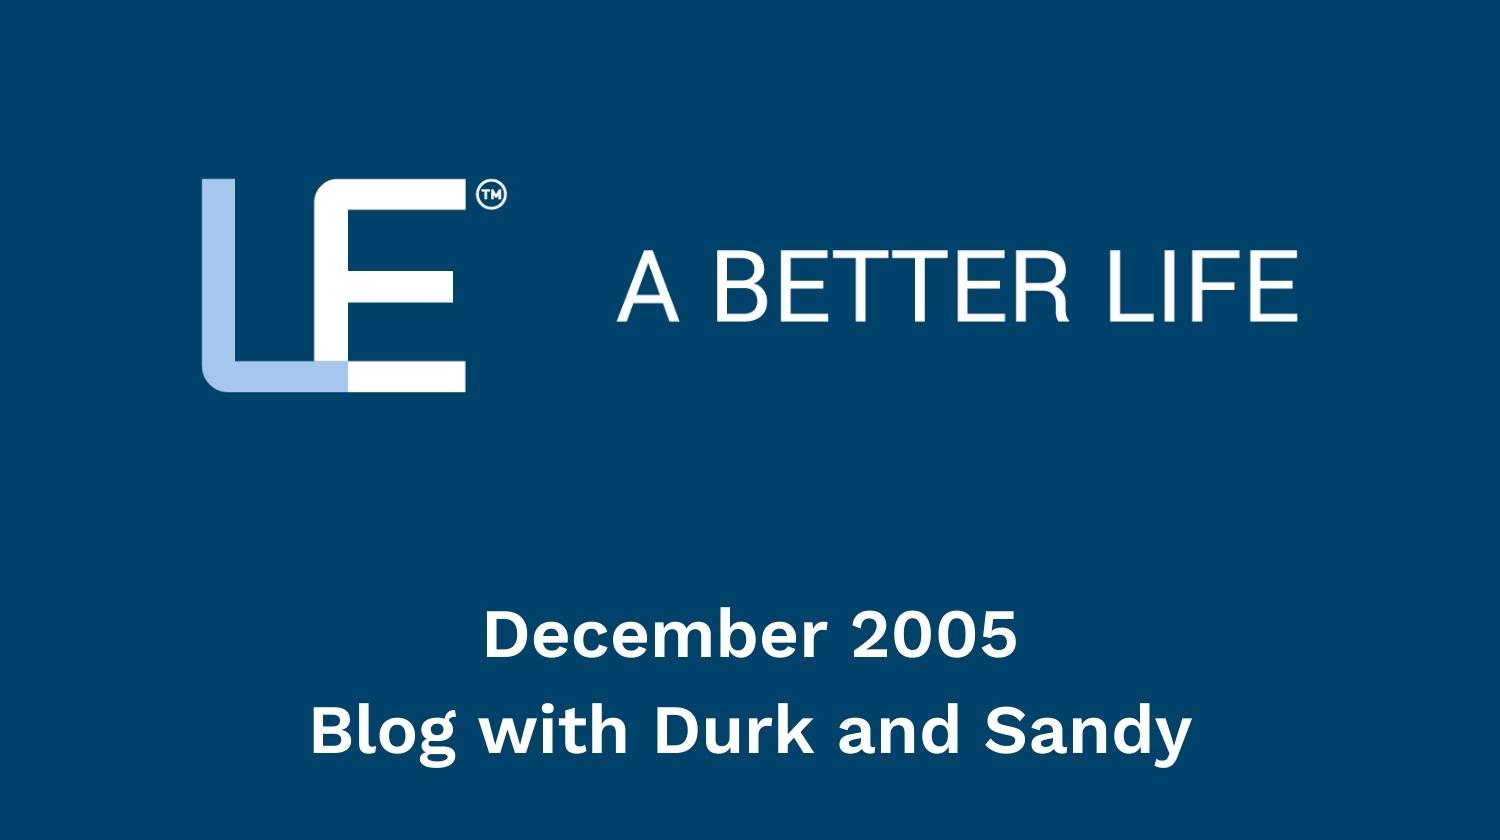 December 2005 Blog with Durk and Sandy